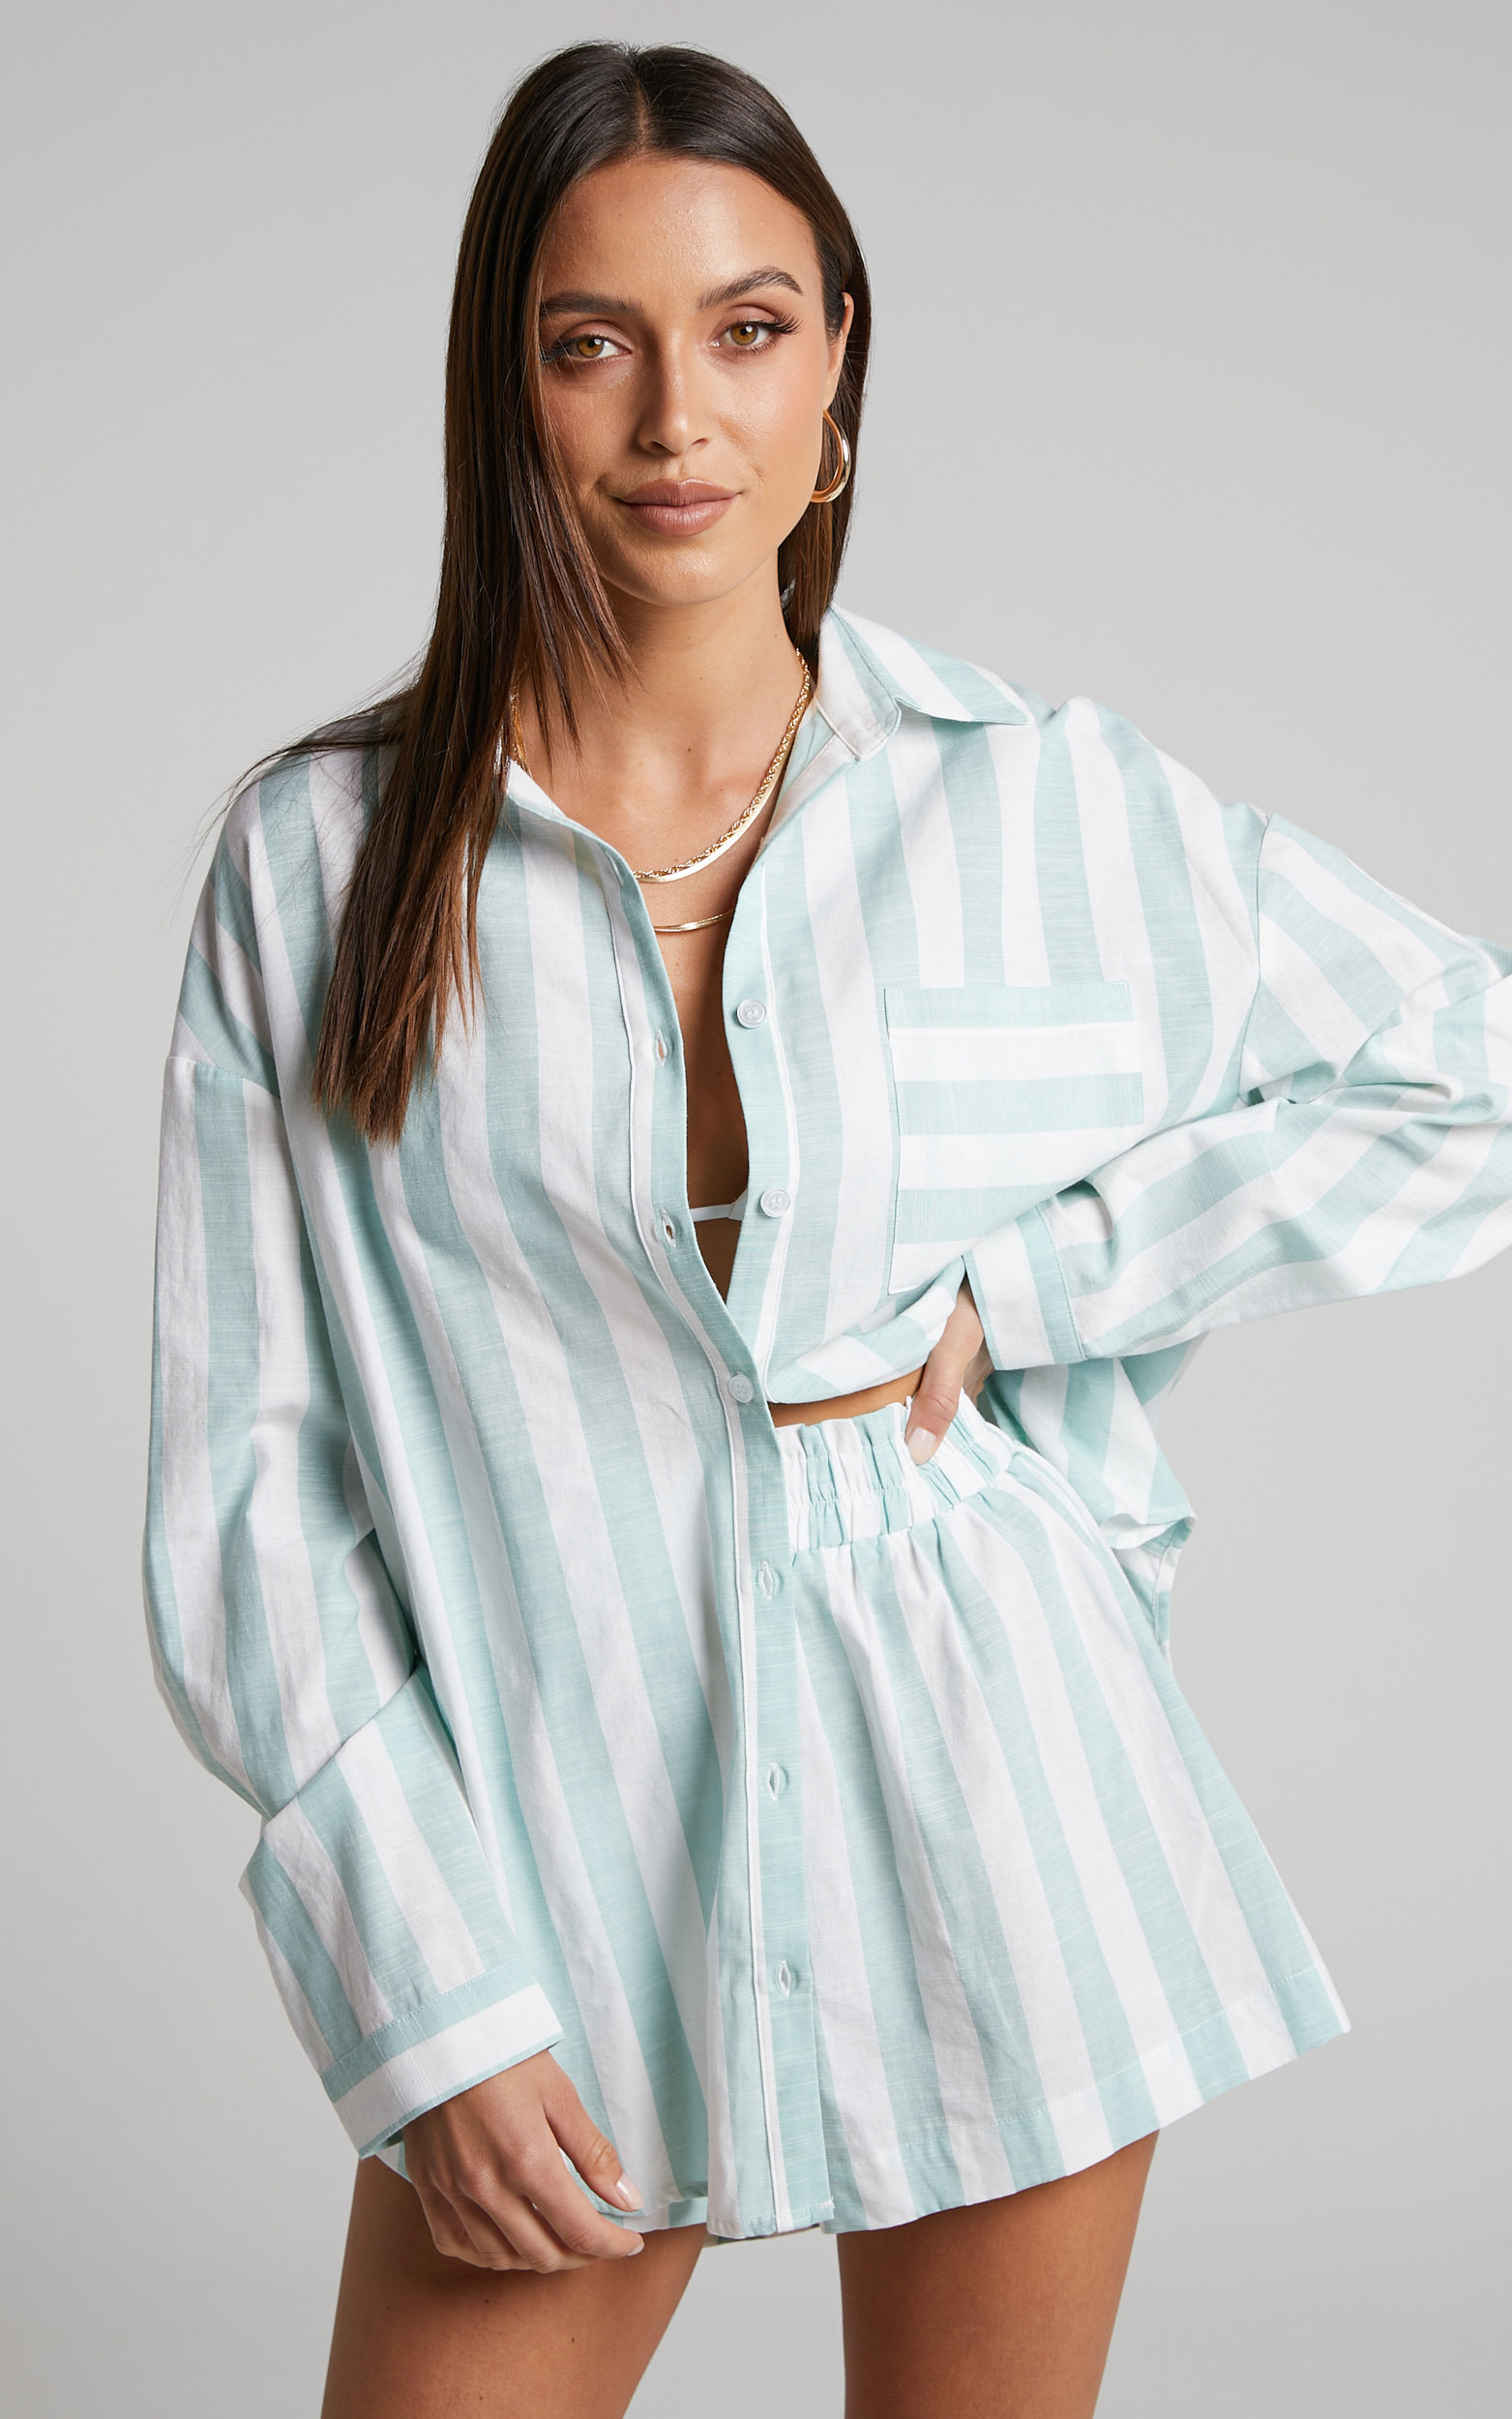 Sahle Shirt - Oversized Striped Shirt in Mint - 04, GRN2, hi-res image number null